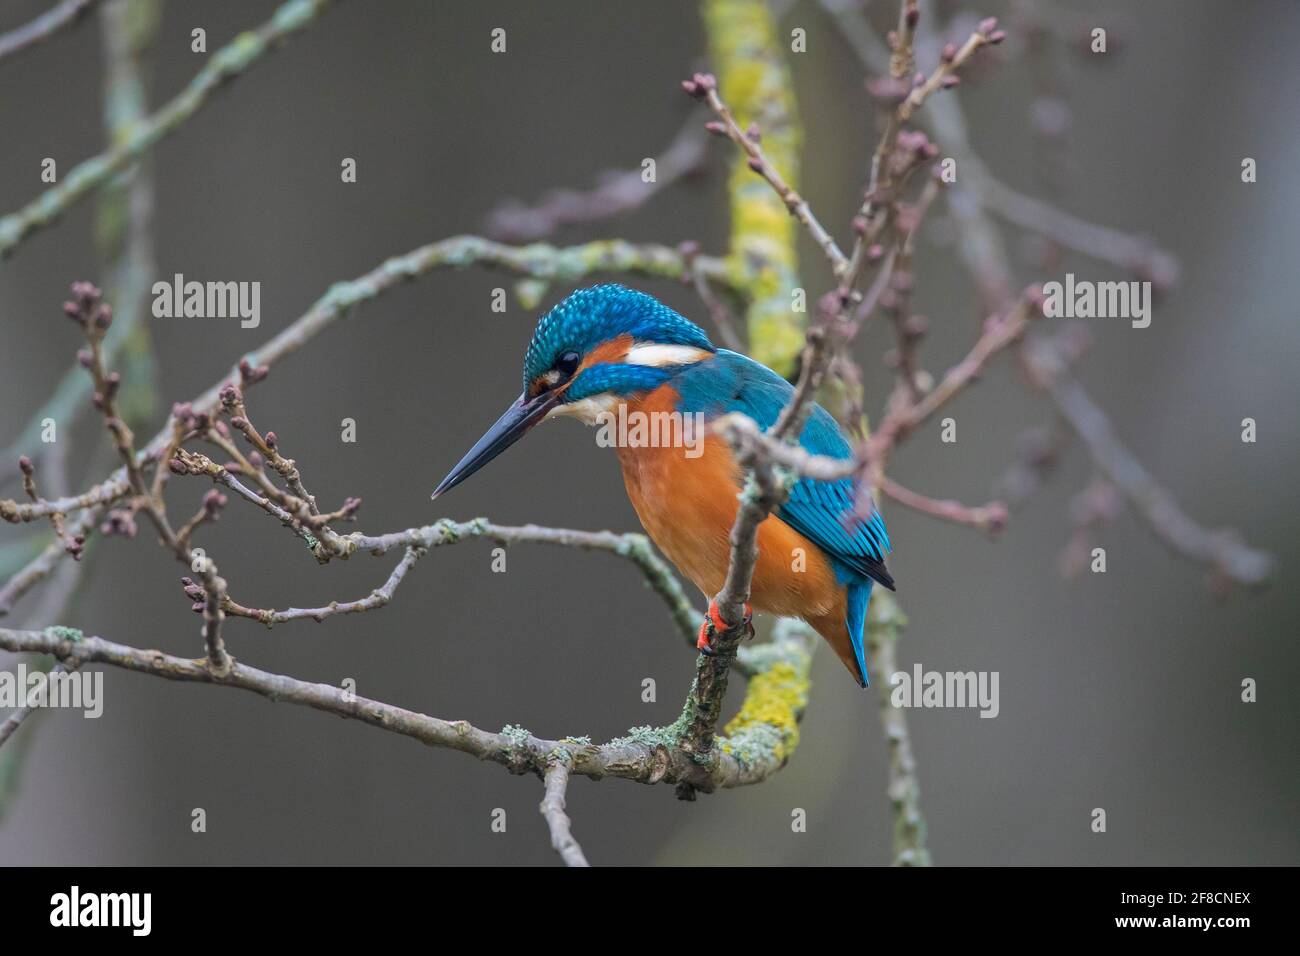 Common kingfisher (Alcedo atthis) male perched in tree with branches hanging over water of pond in winter Stock Photo